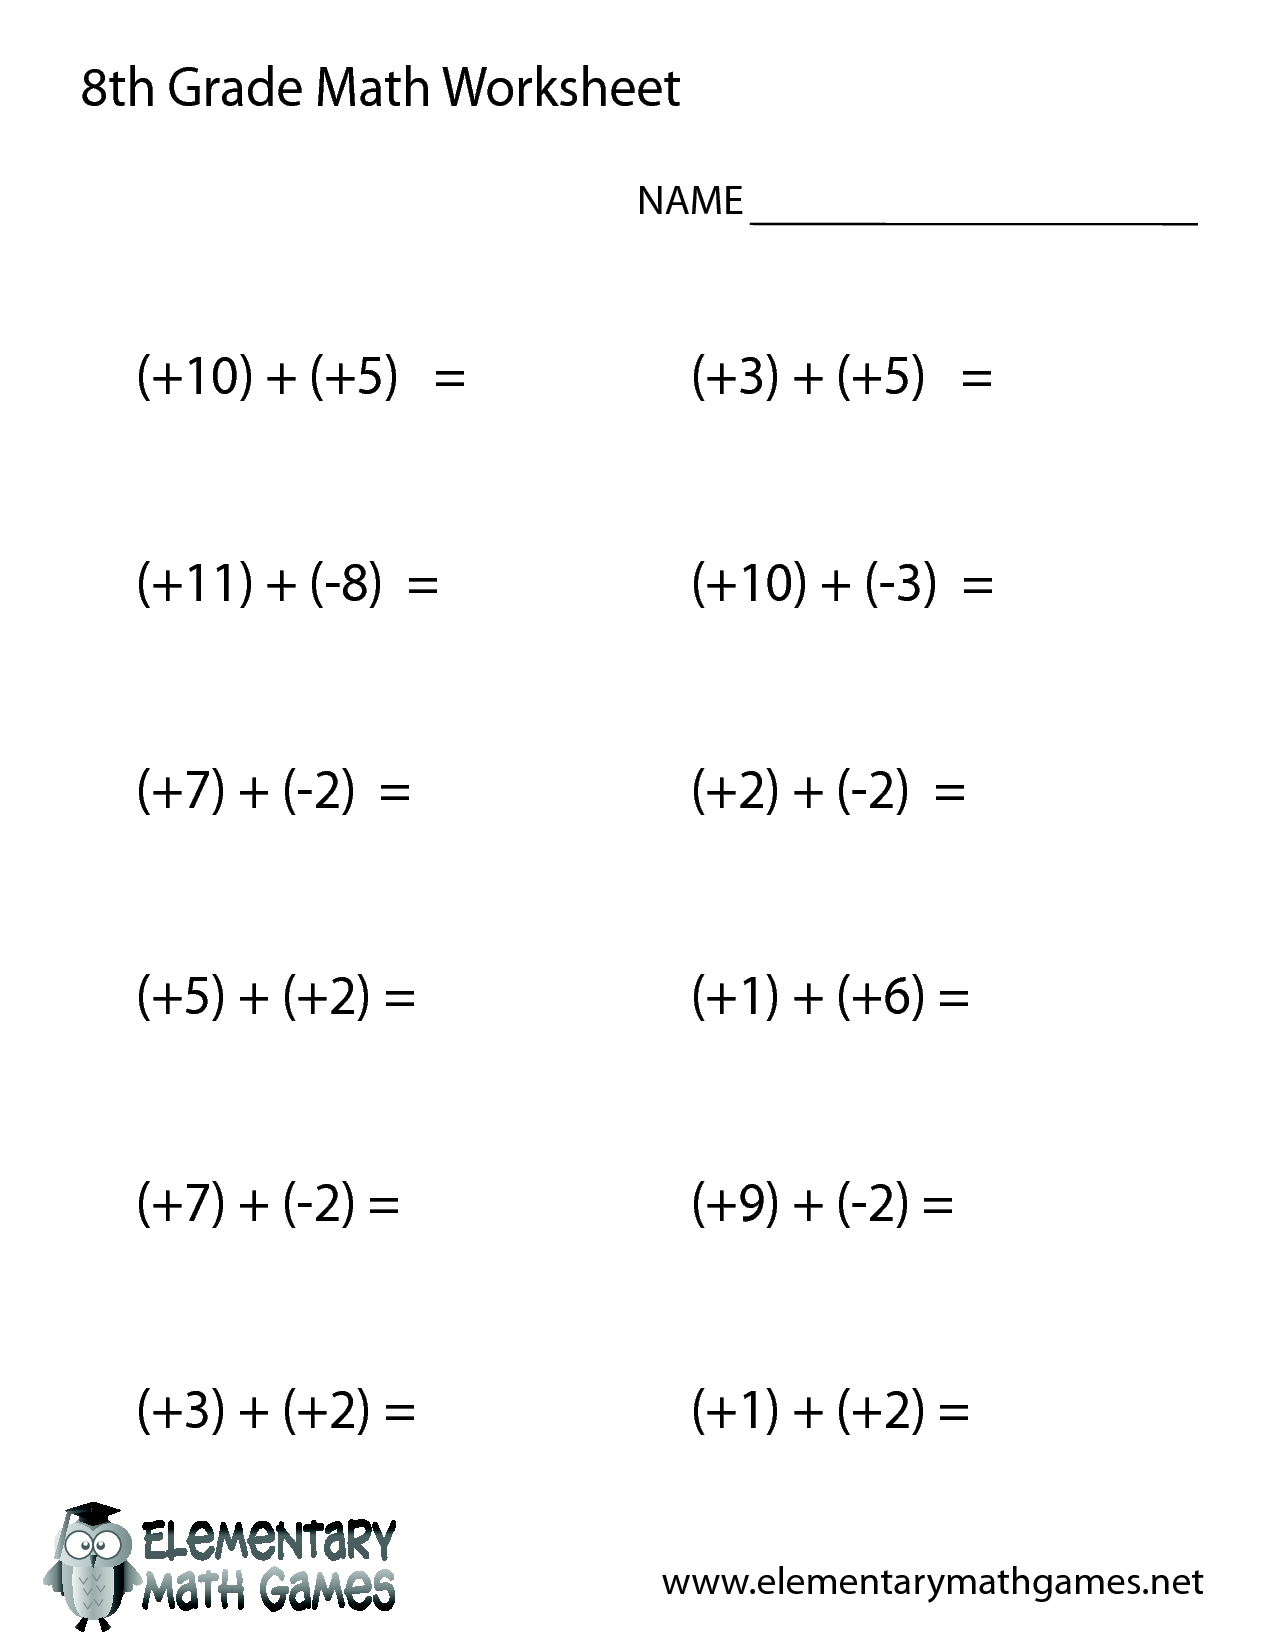 14-best-images-of-7th-grade-math-worksheets-to-print-7th-grade-math-worksheets-pdf-math